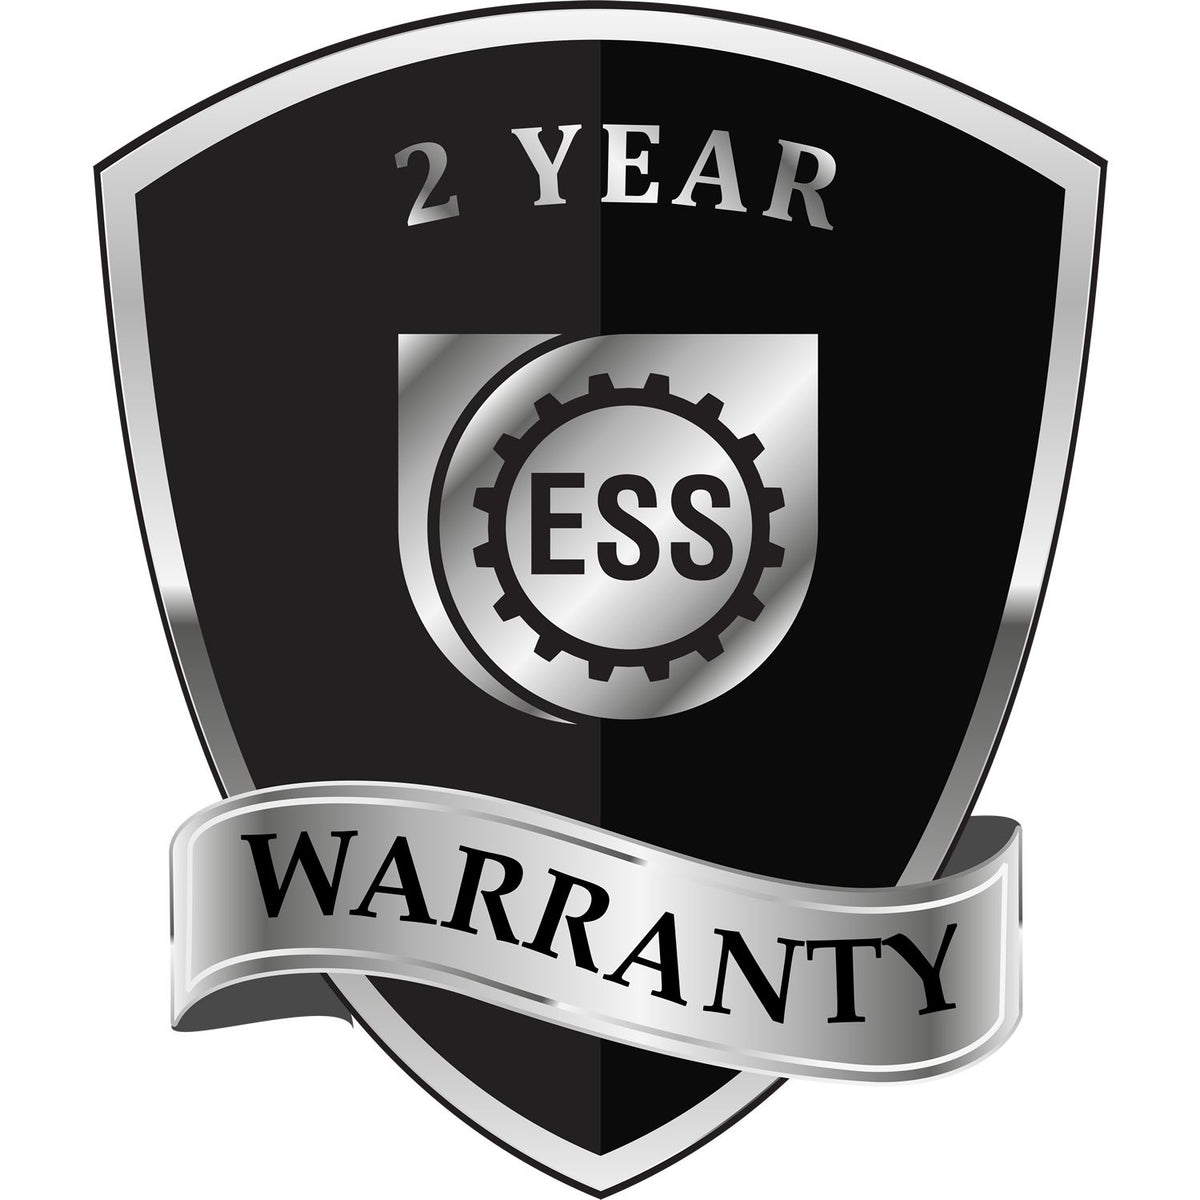 A badge or emblem showing a warranty icon for the Soft Mississippi Professional Engineer Seal